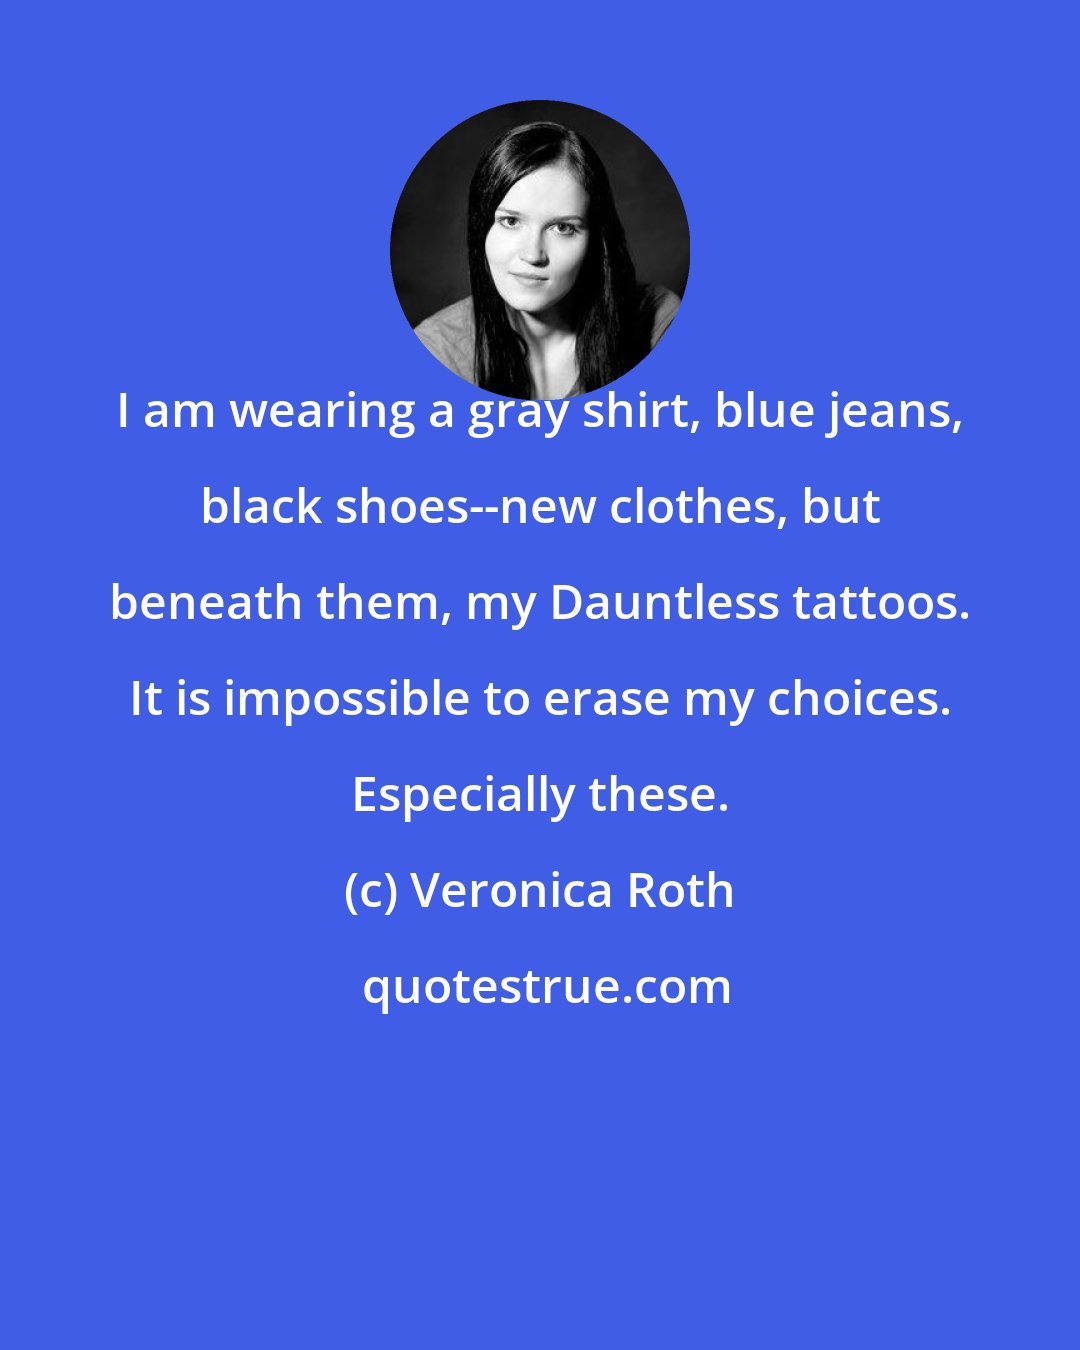 Veronica Roth: I am wearing a gray shirt, blue jeans, black shoes--new clothes, but beneath them, my Dauntless tattoos. It is impossible to erase my choices. Especially these.